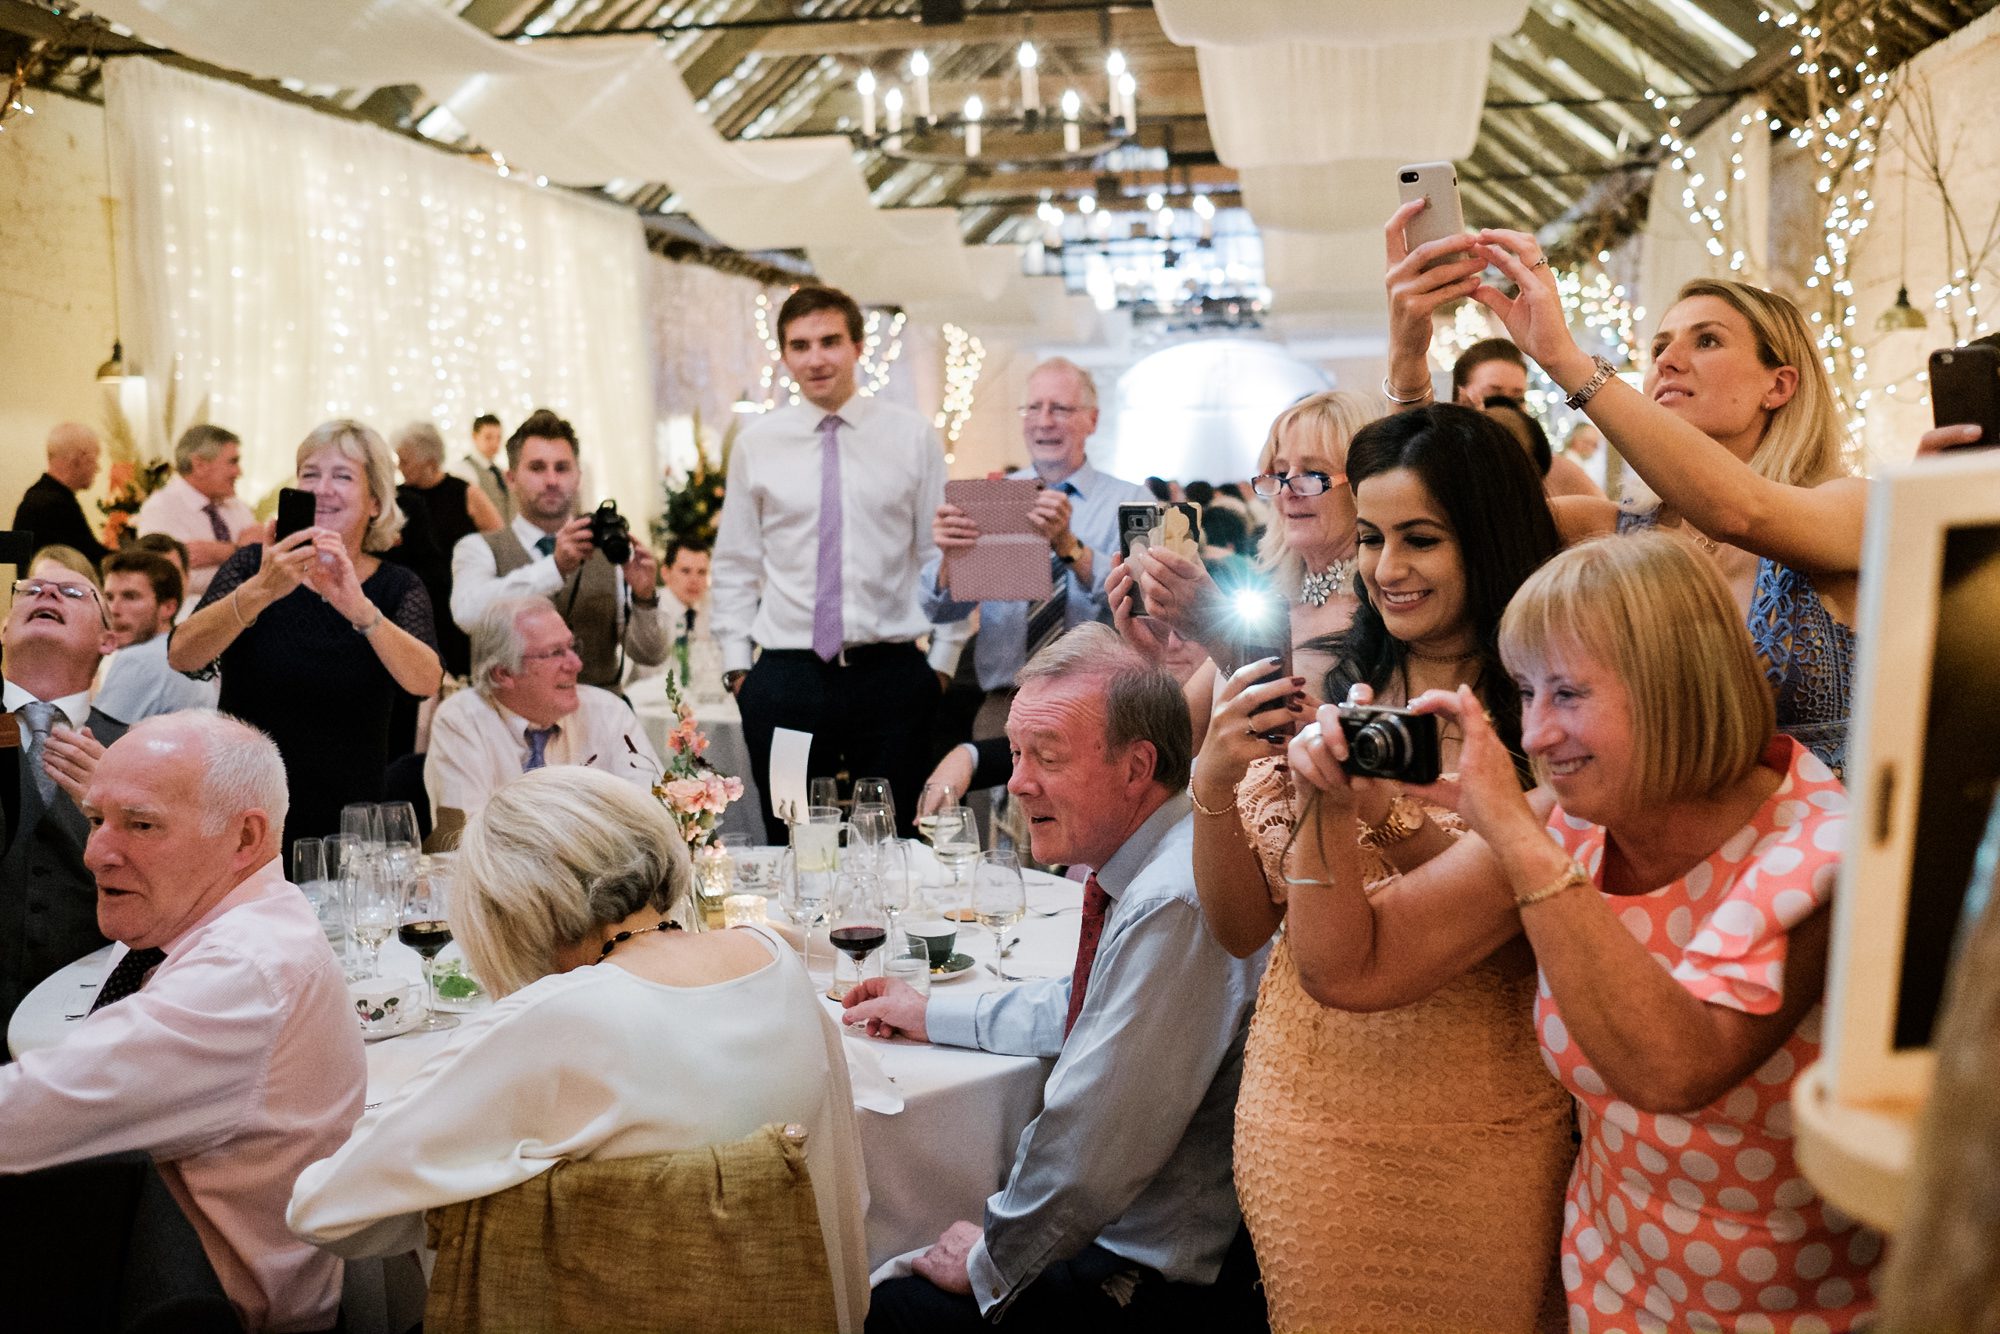 guests take photos of cake cutting